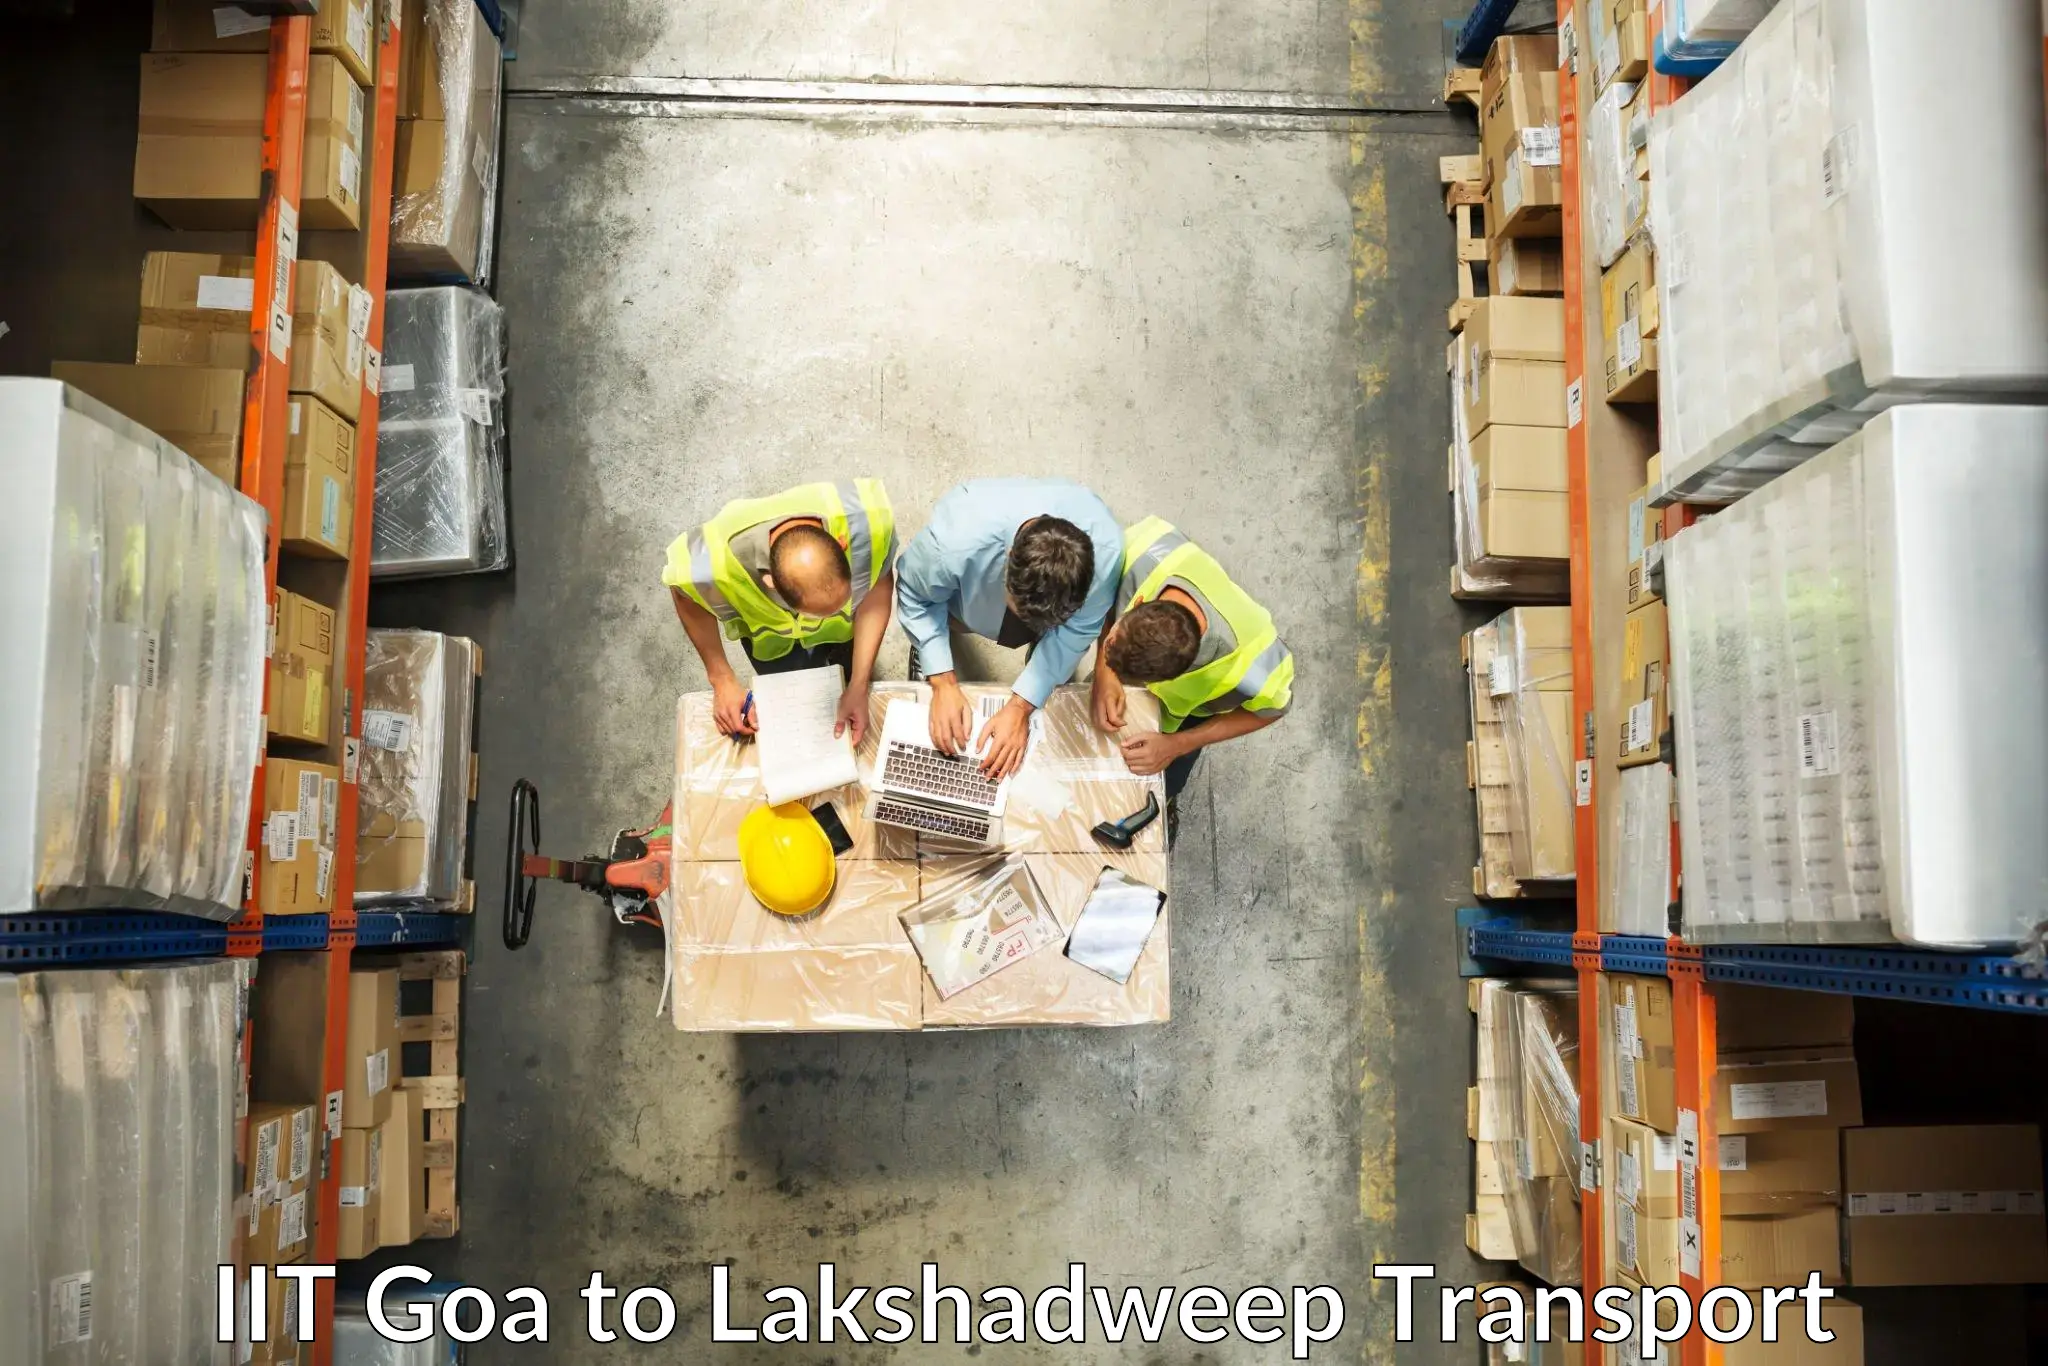 Commercial transport service IIT Goa to Lakshadweep